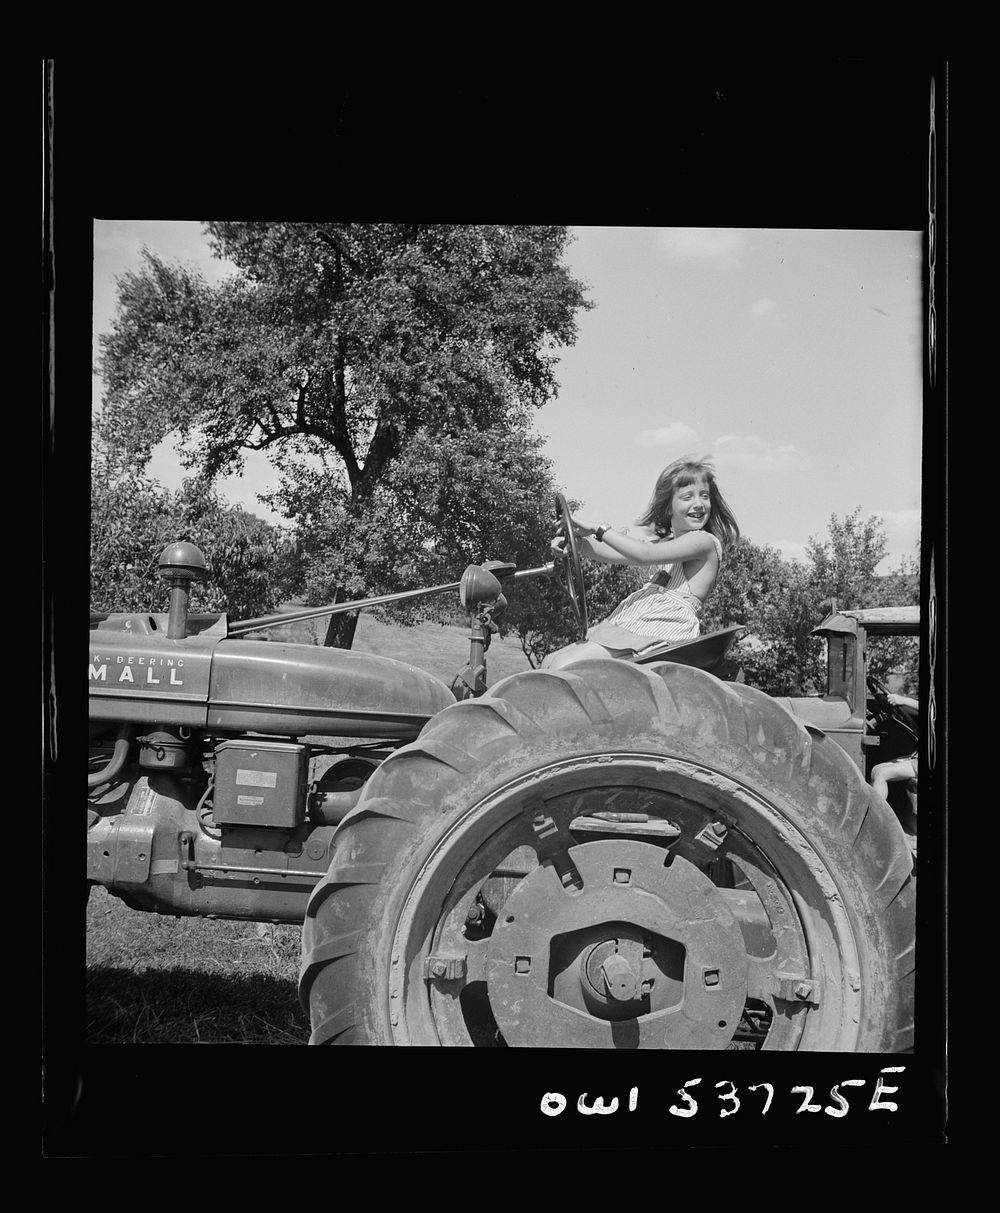 Dresher, Pennsylvania. The daughter of the owner of the Spring Run Farm on a tractor. Sourced from the Library of Congress.